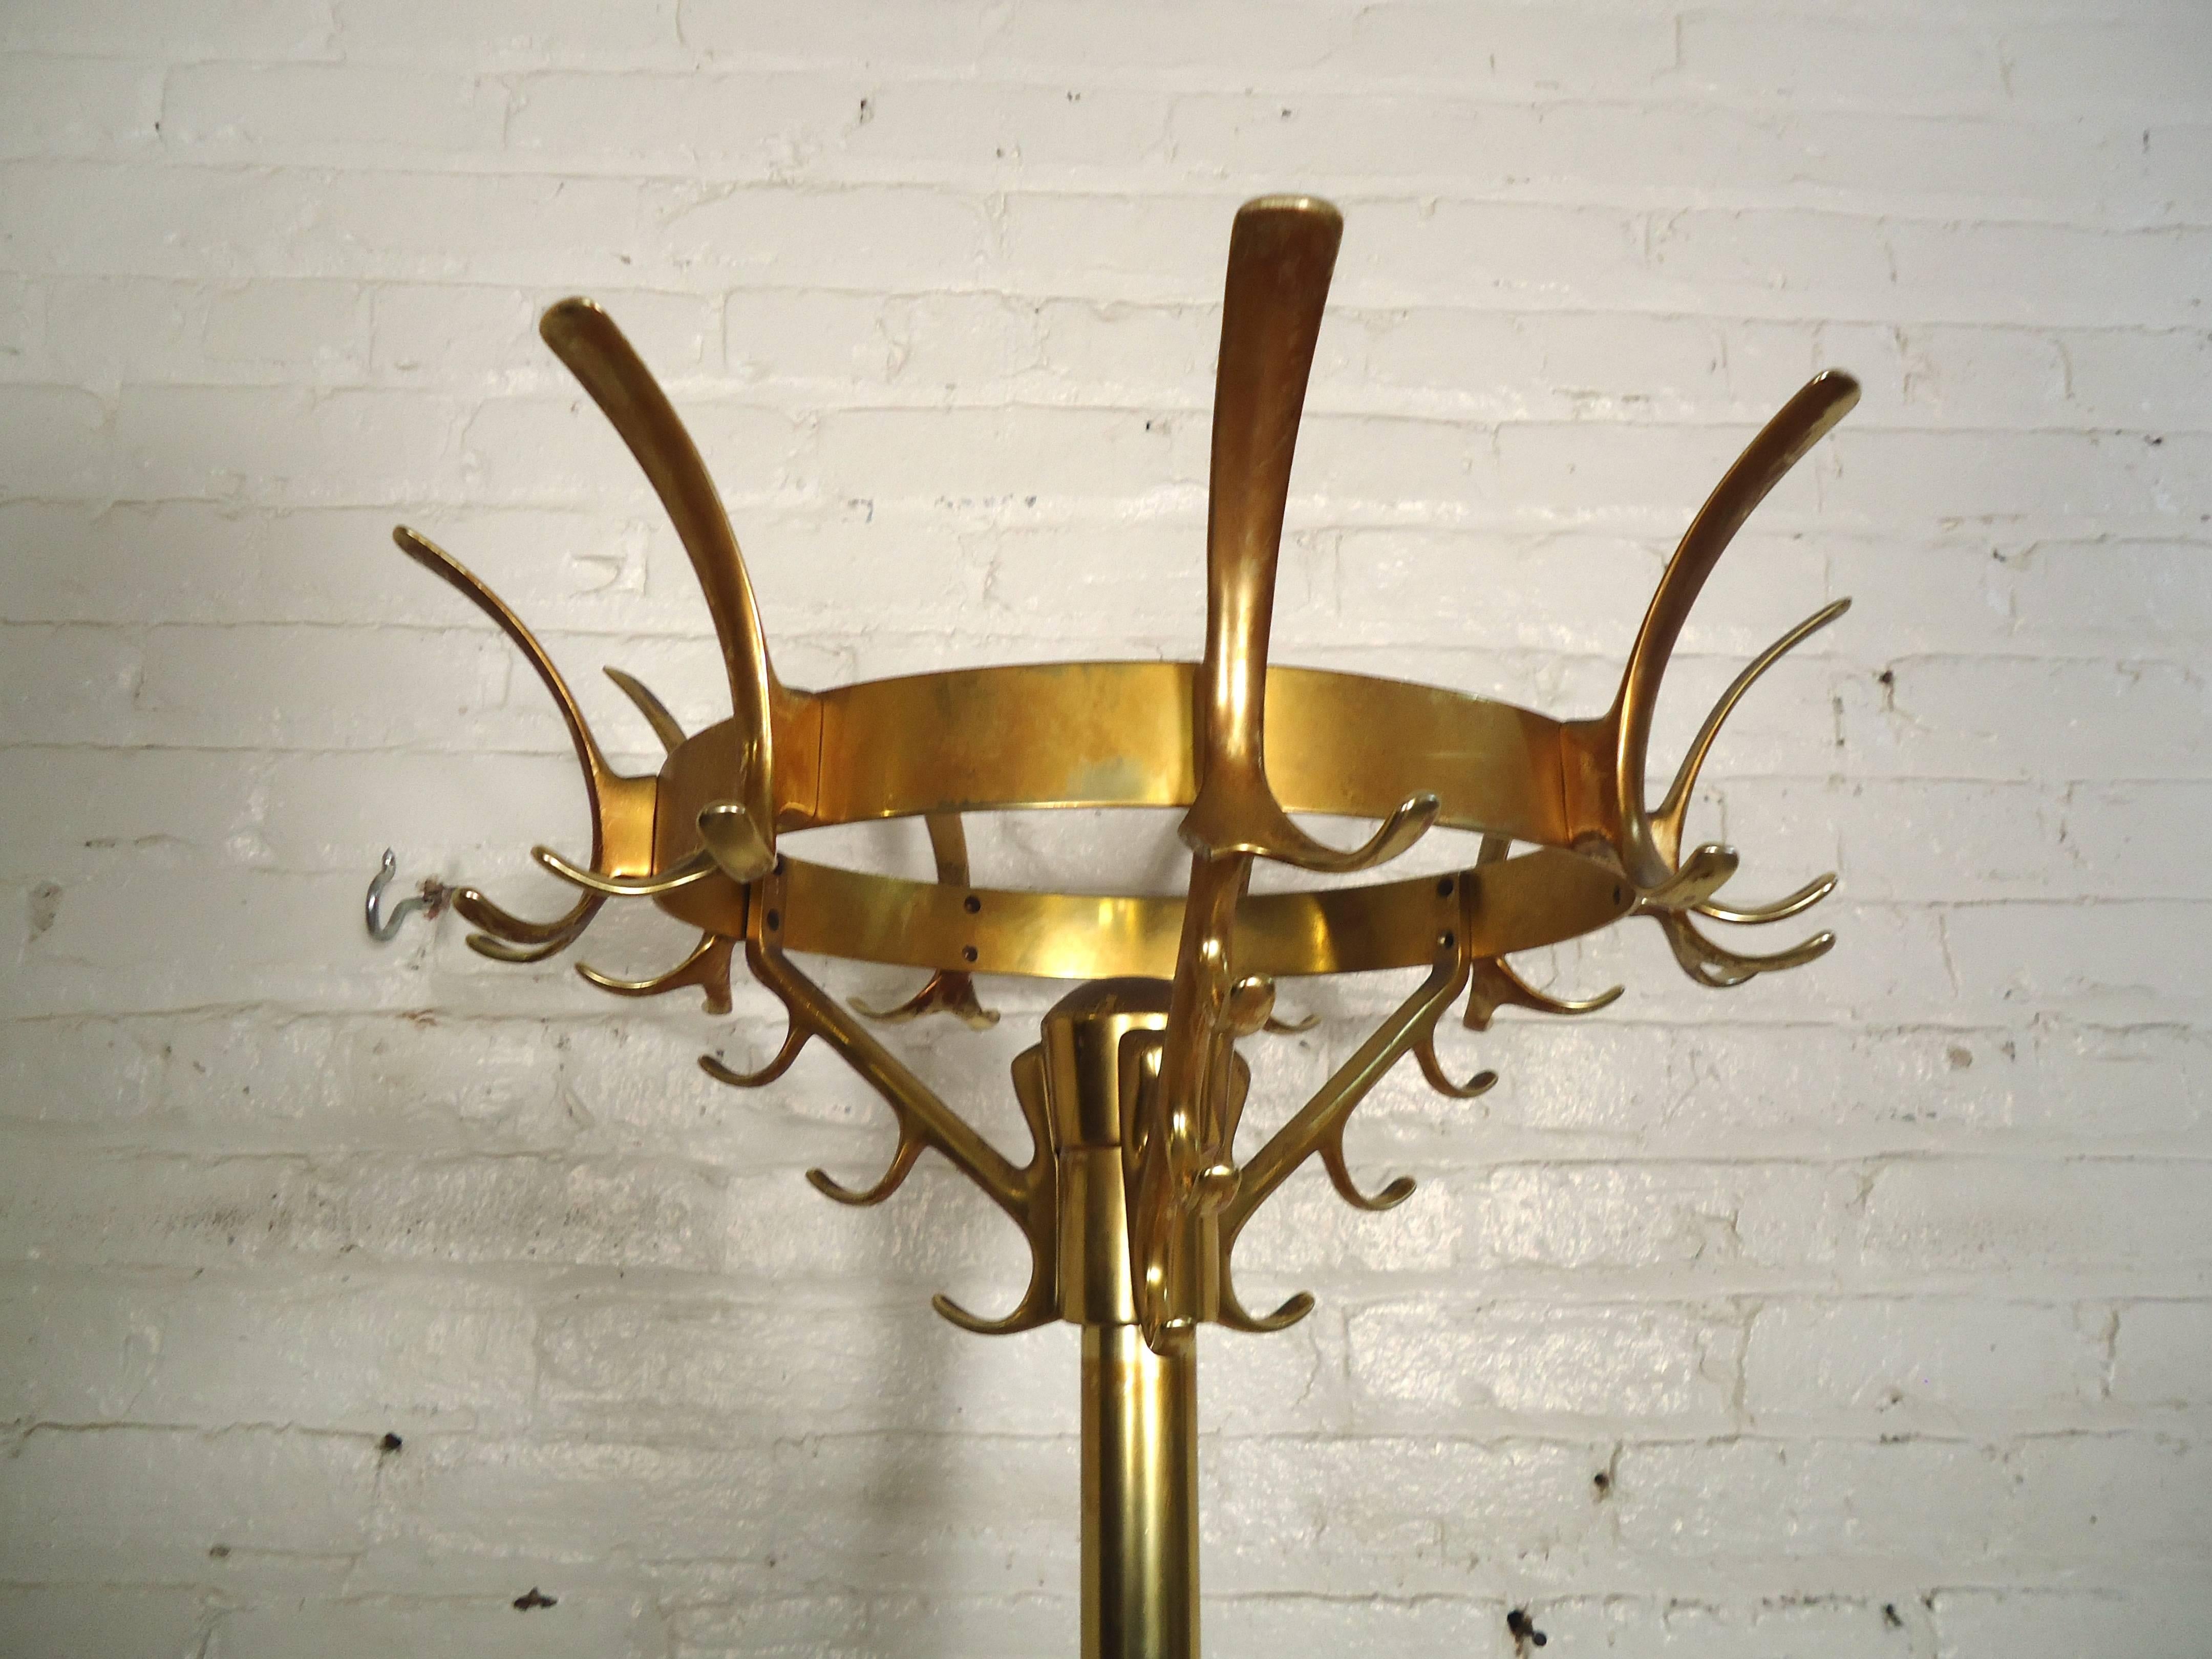 Beautiful vintage coat rack with scooping brass hooks and round umbrella holder.

(Please confirm item location - NY or NJ - with dealer)
